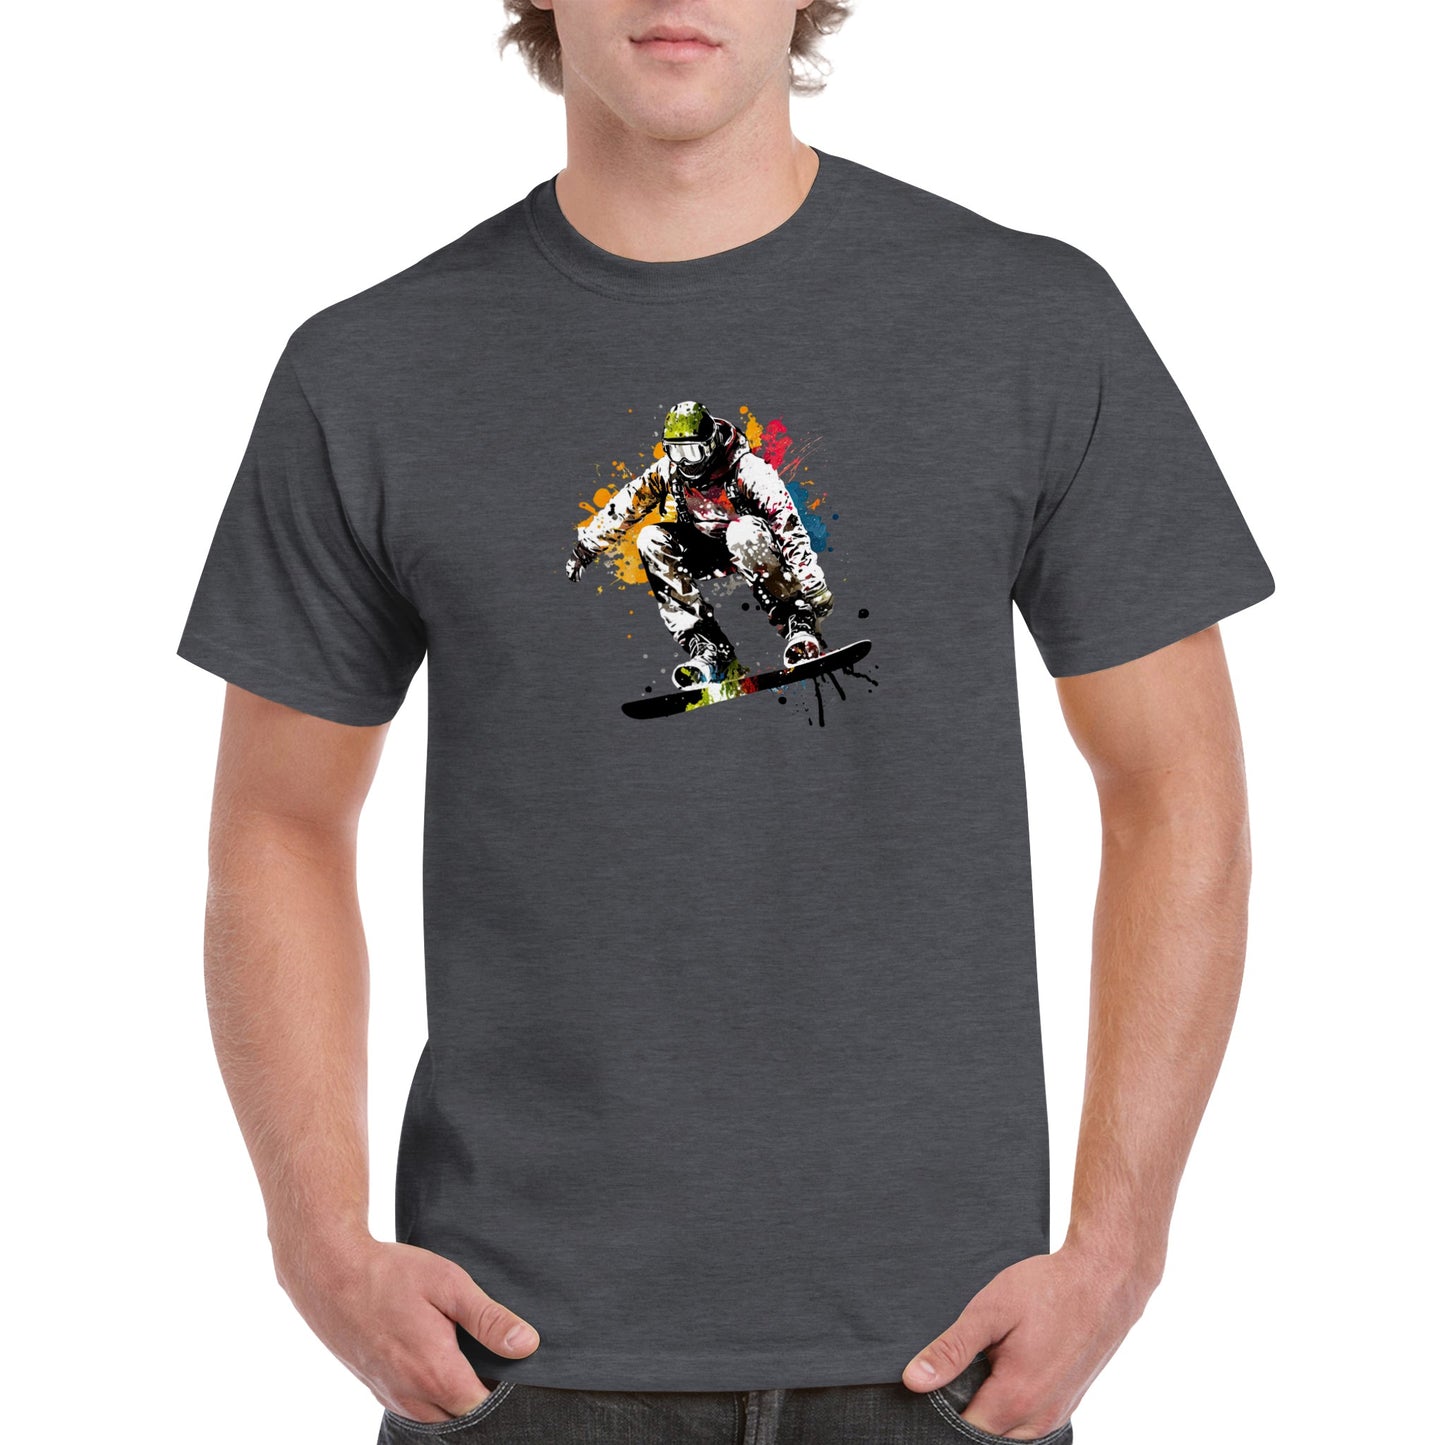 Guy wearing a grey t-shirt with a snowboarder print